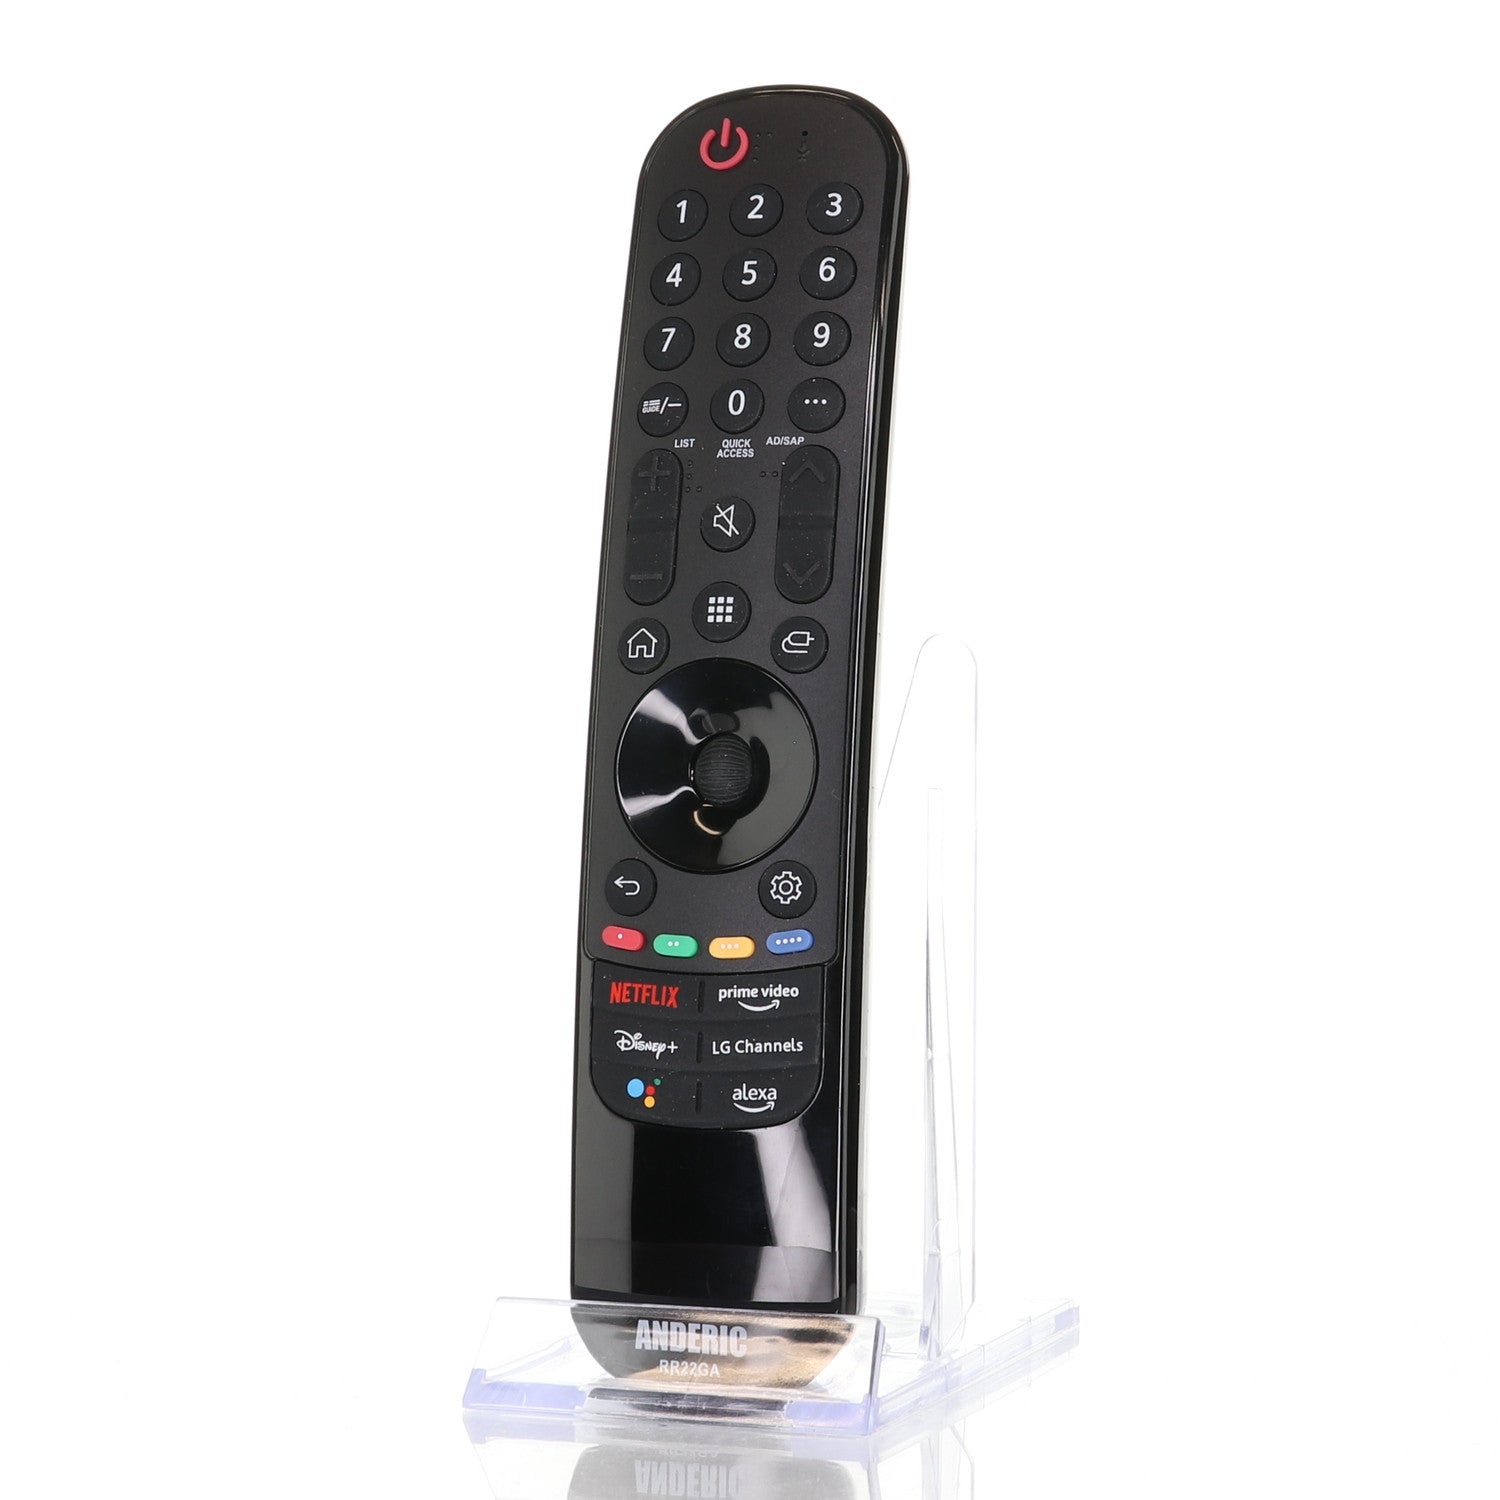 RR22GA Magic Remote Control (IR) for LG® Smart Tvs - No Voice/Mouse Functionality